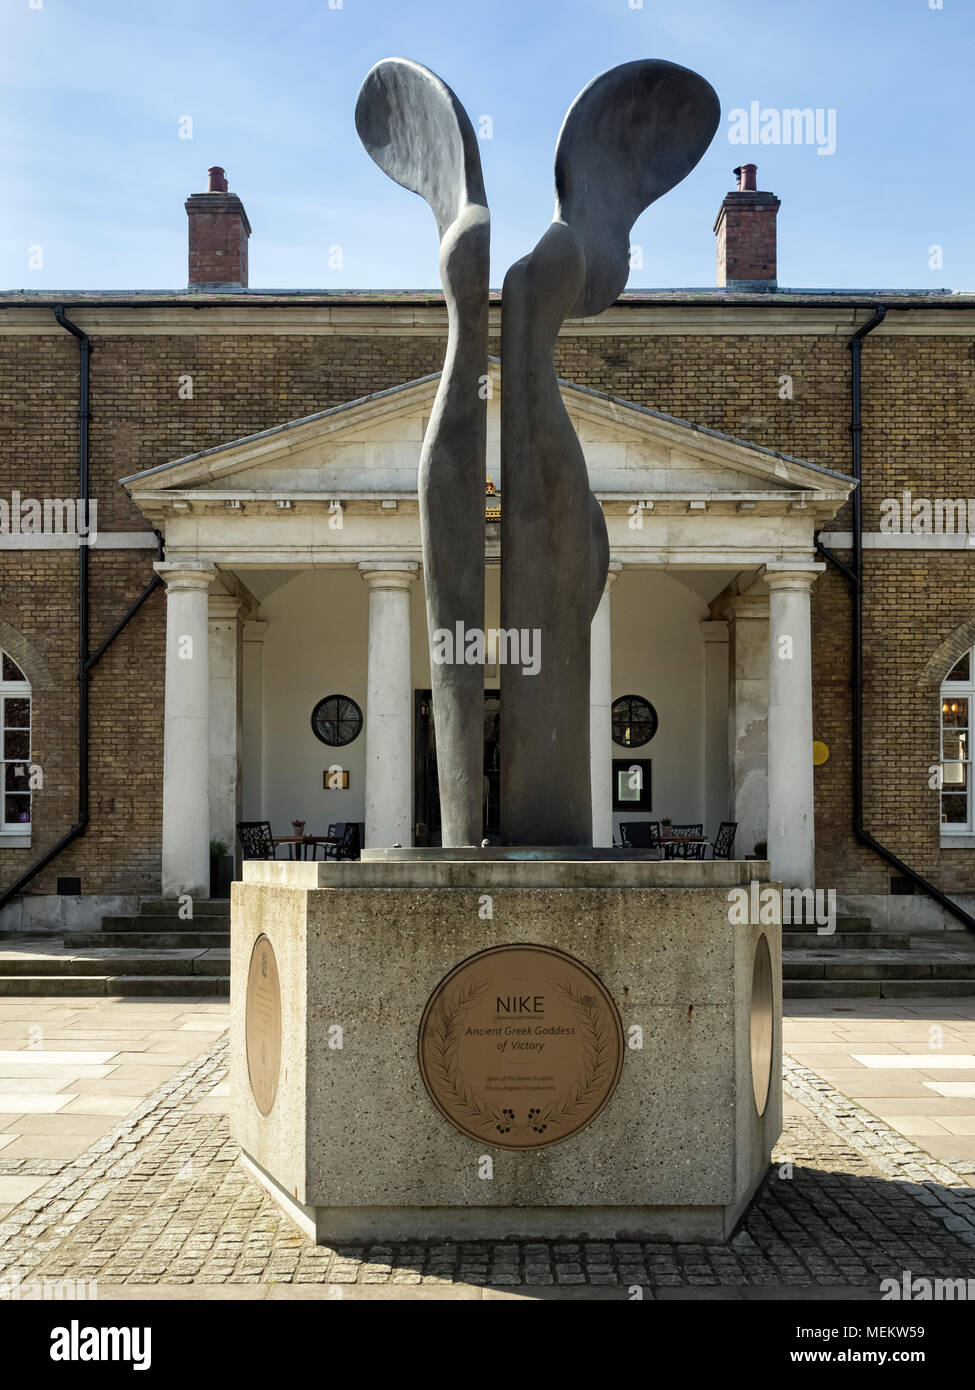 LONDON, Großbritannien - 05. APRIL 2018: The Nike Statue by Pavlos Angelos in Dial Arch Square in Woolwich Stockfoto